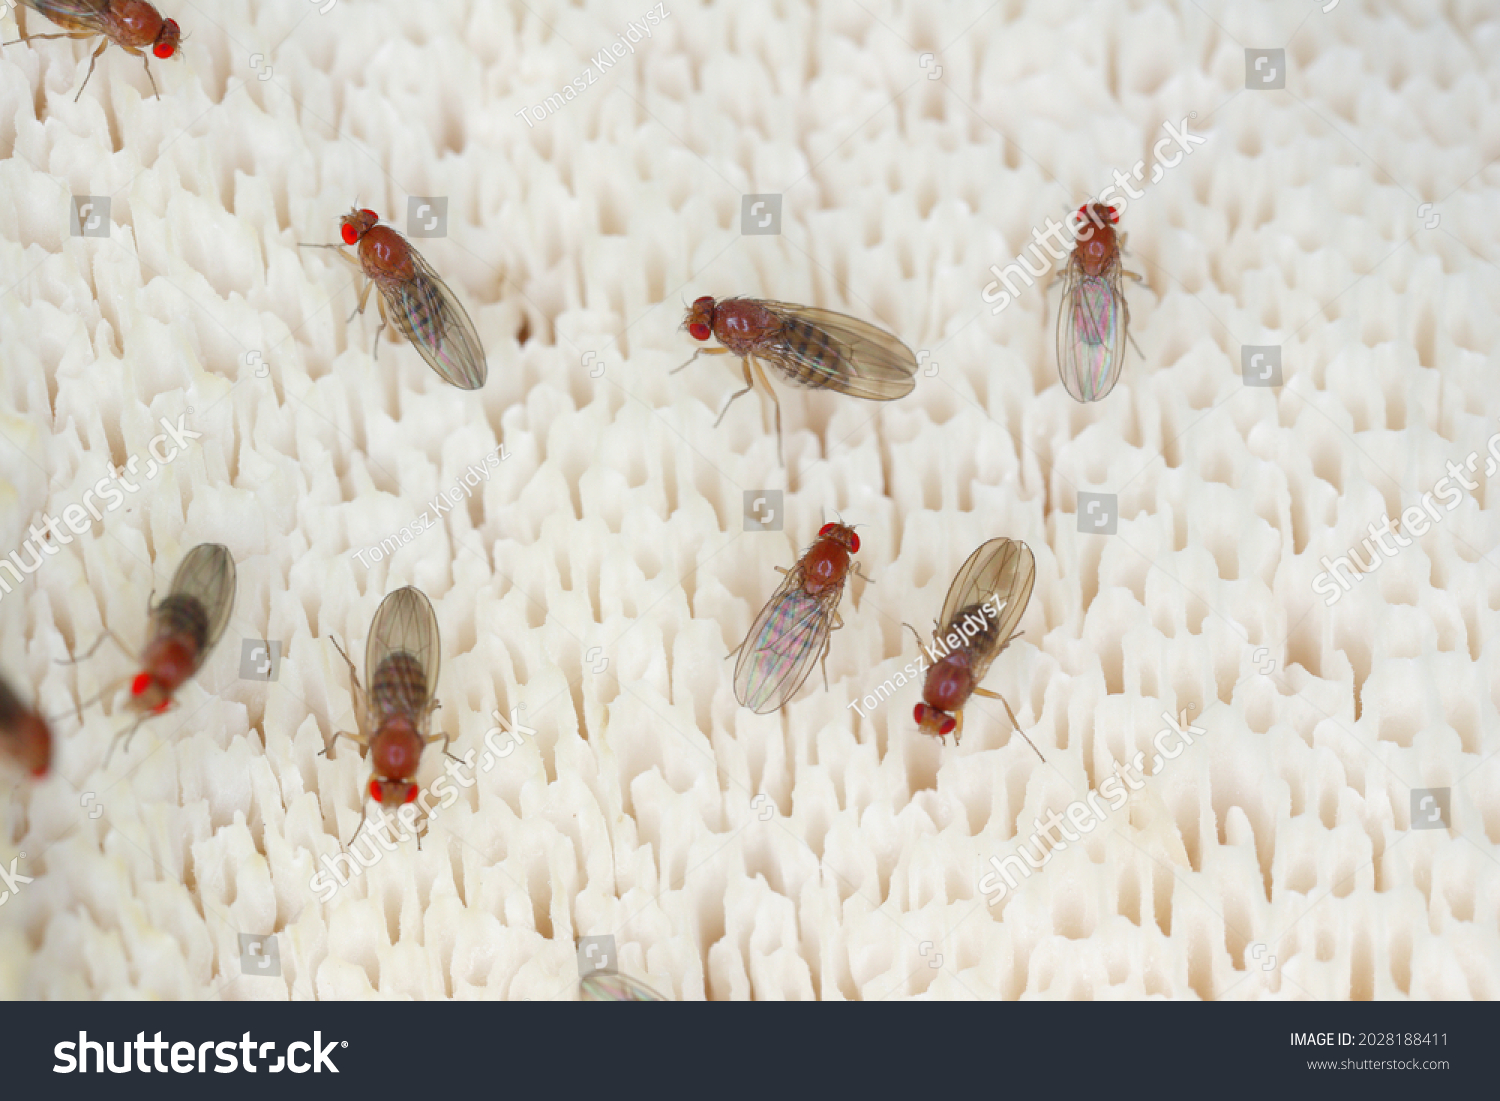 common fruit fly or vinegar fly Drosophila melanogaster is a species of fly in the family Drosophilidae. It is pest of fruits and food made from fruit #2028188411